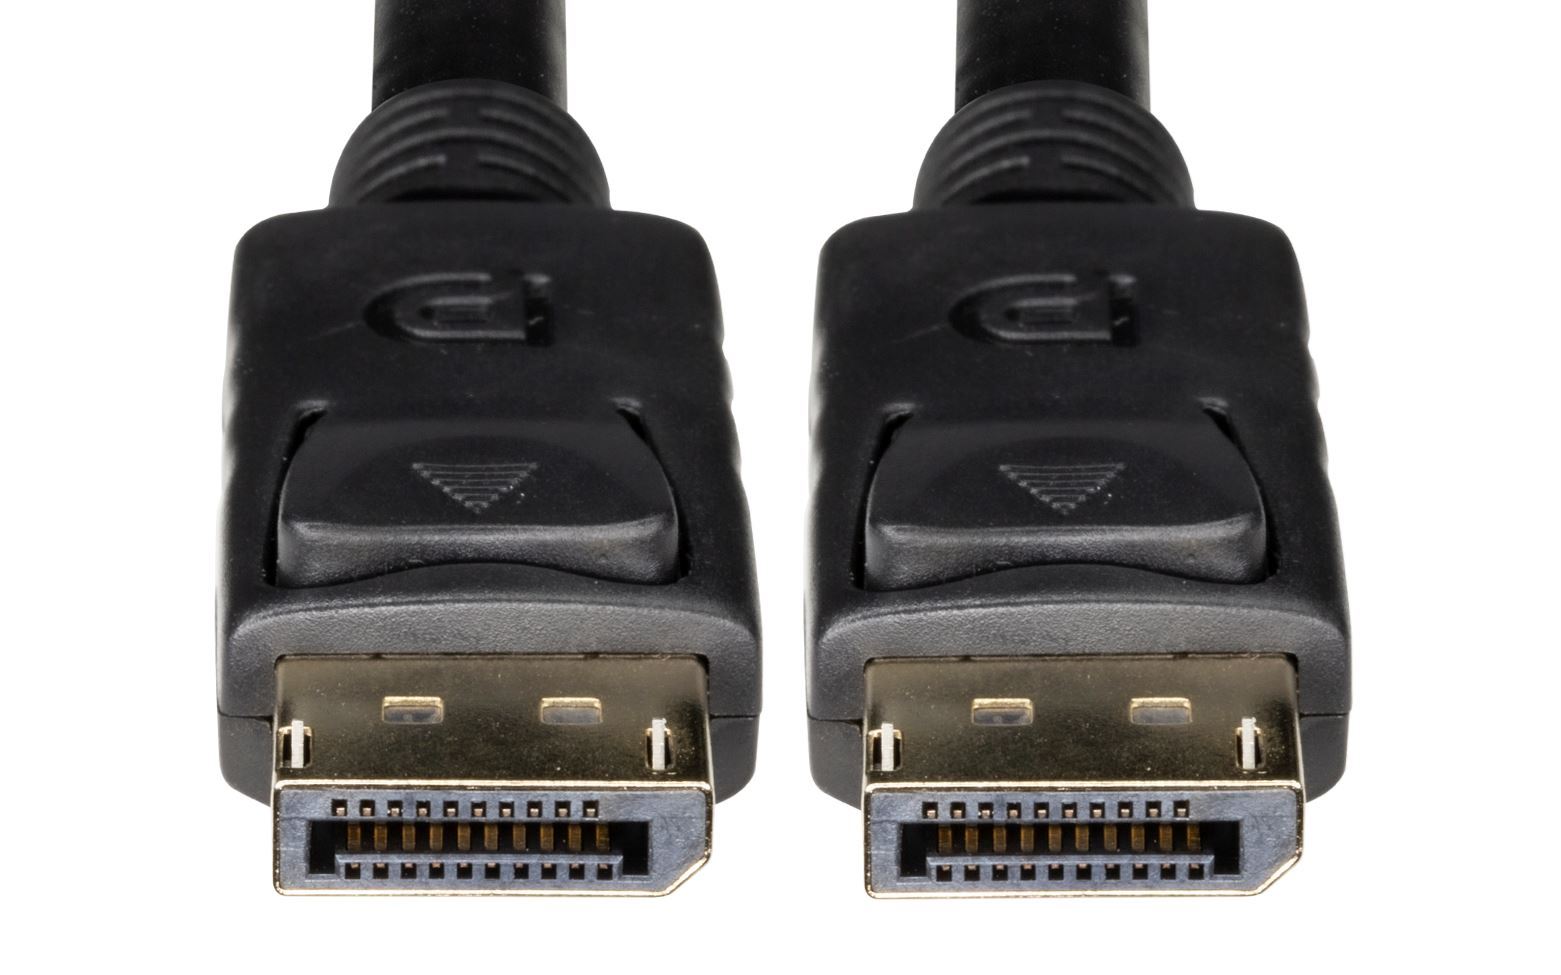 DYNAMIX_2m_DisplayPort_V1.4_Cable_Supports_up_to_8K_(FUHD)_Resolution._28AWG,_M/M_DP_Connectors,_Max._Res_7680x4320_@_60Hz,_Latched_Connectors,_Flexible_Cable,_Gold-Plated_Connectors. 576